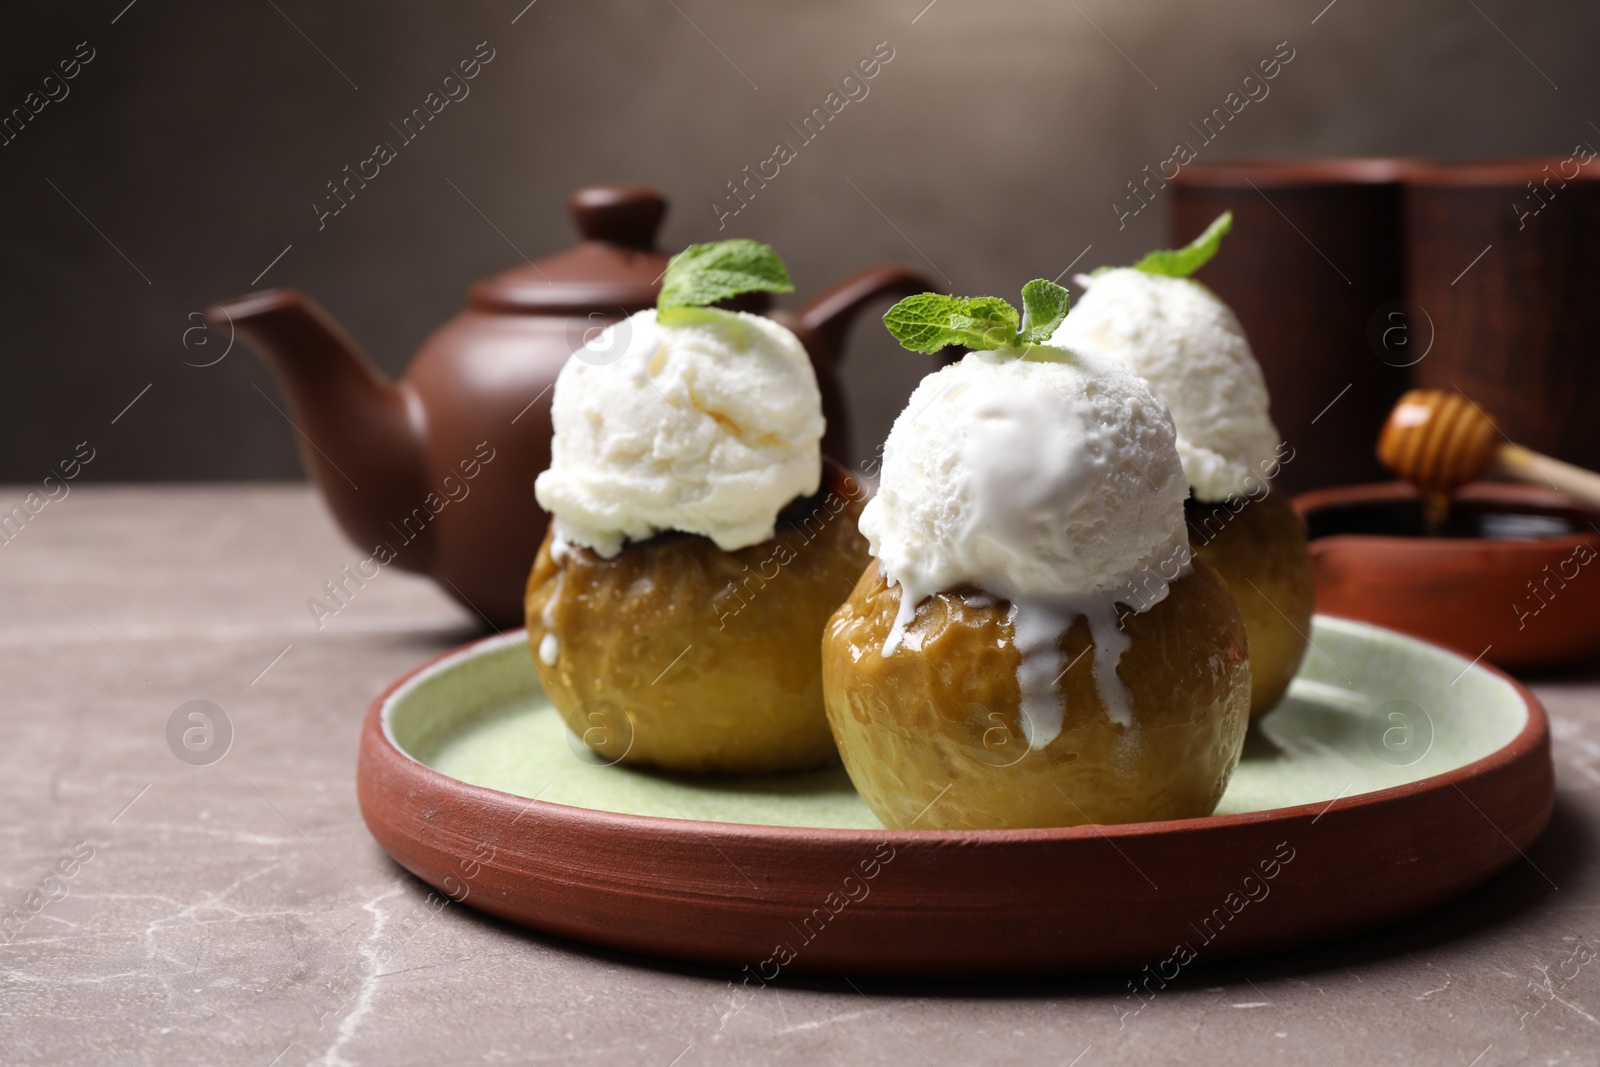 Photo of Delicious baked apples with ice cream and mint served on grey table, space for text